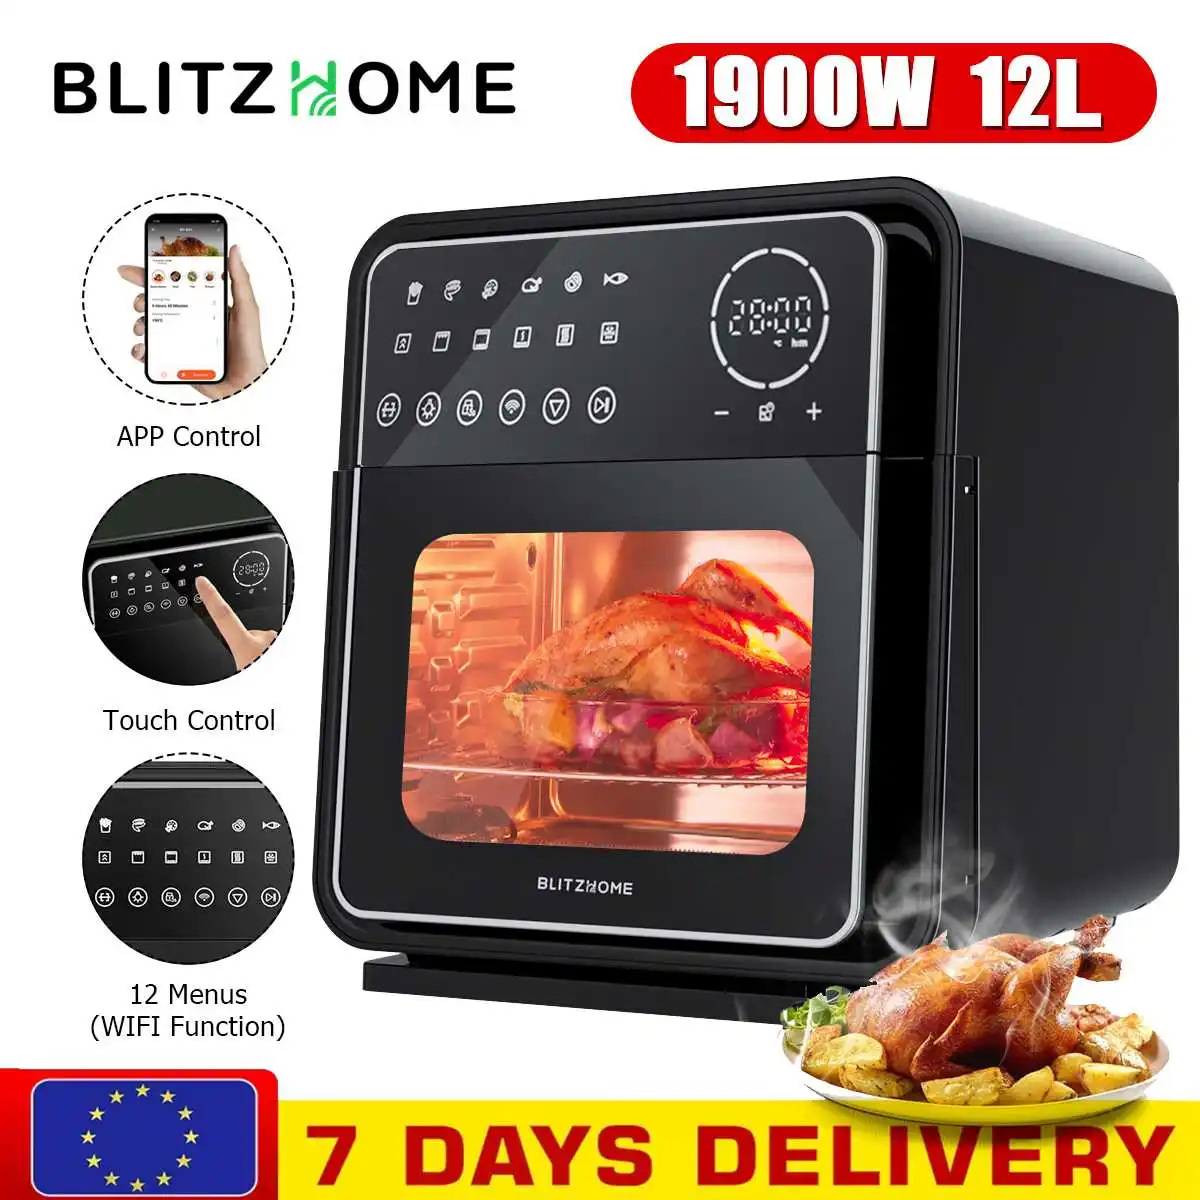 

BlitzHome 12L Electric Air Fryer Oven Toaster Rotisserie Dehydrator Smart LED Touchscreen Large Capacity Chicken Frying Machine